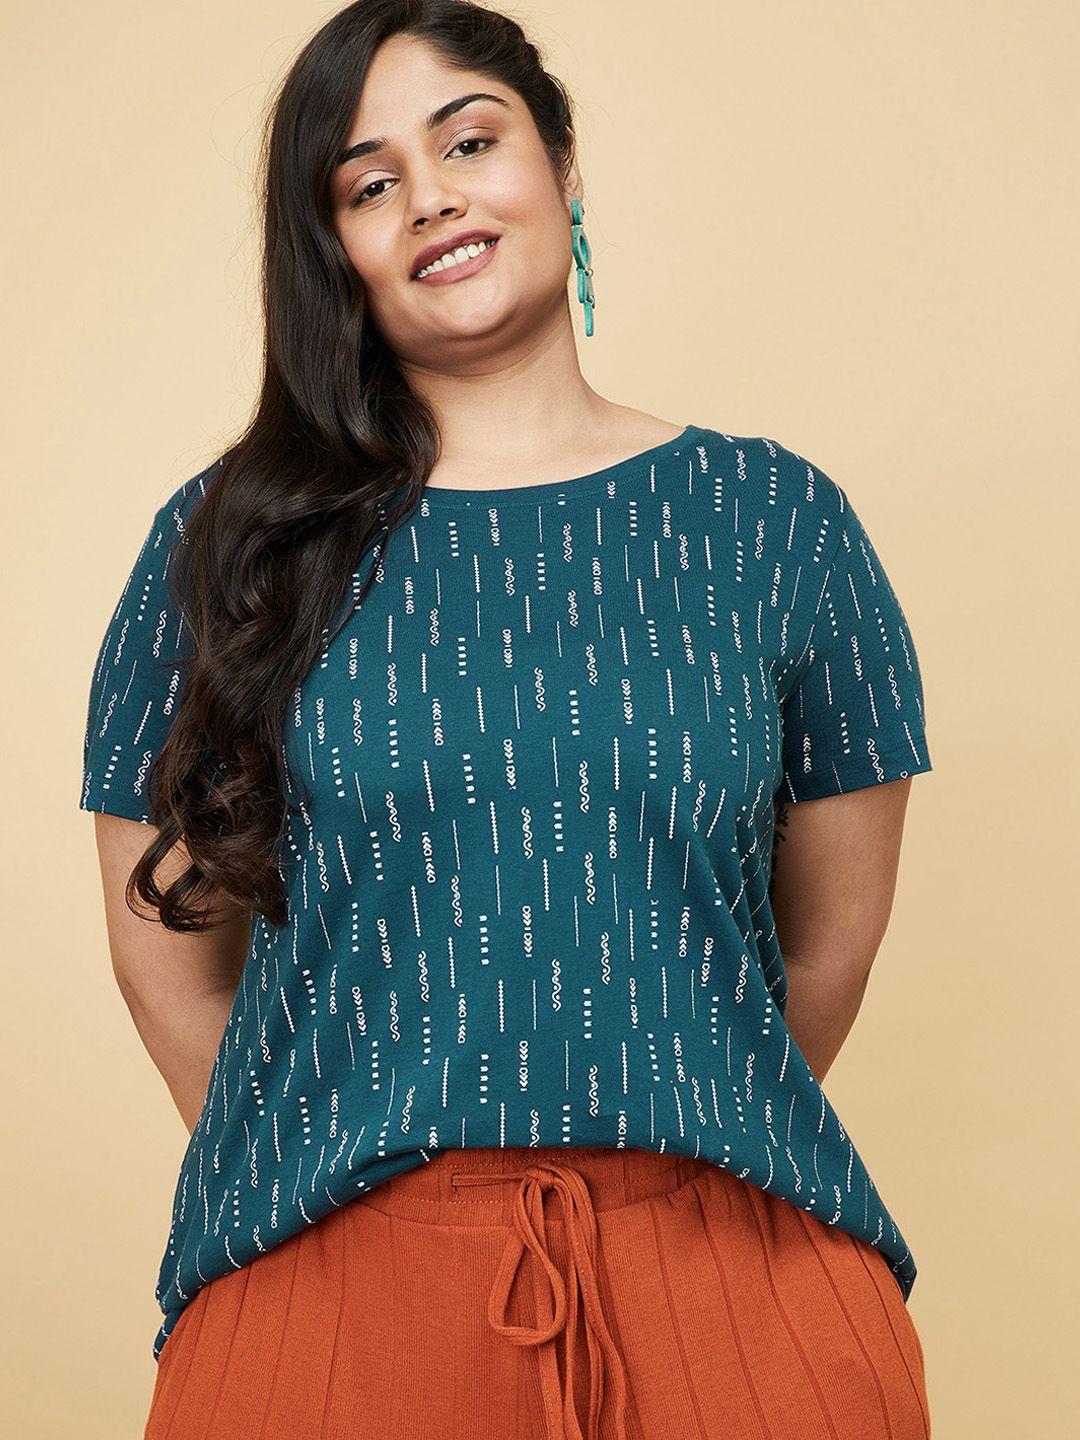 max plus size women teal printed pure cotton t-shirt